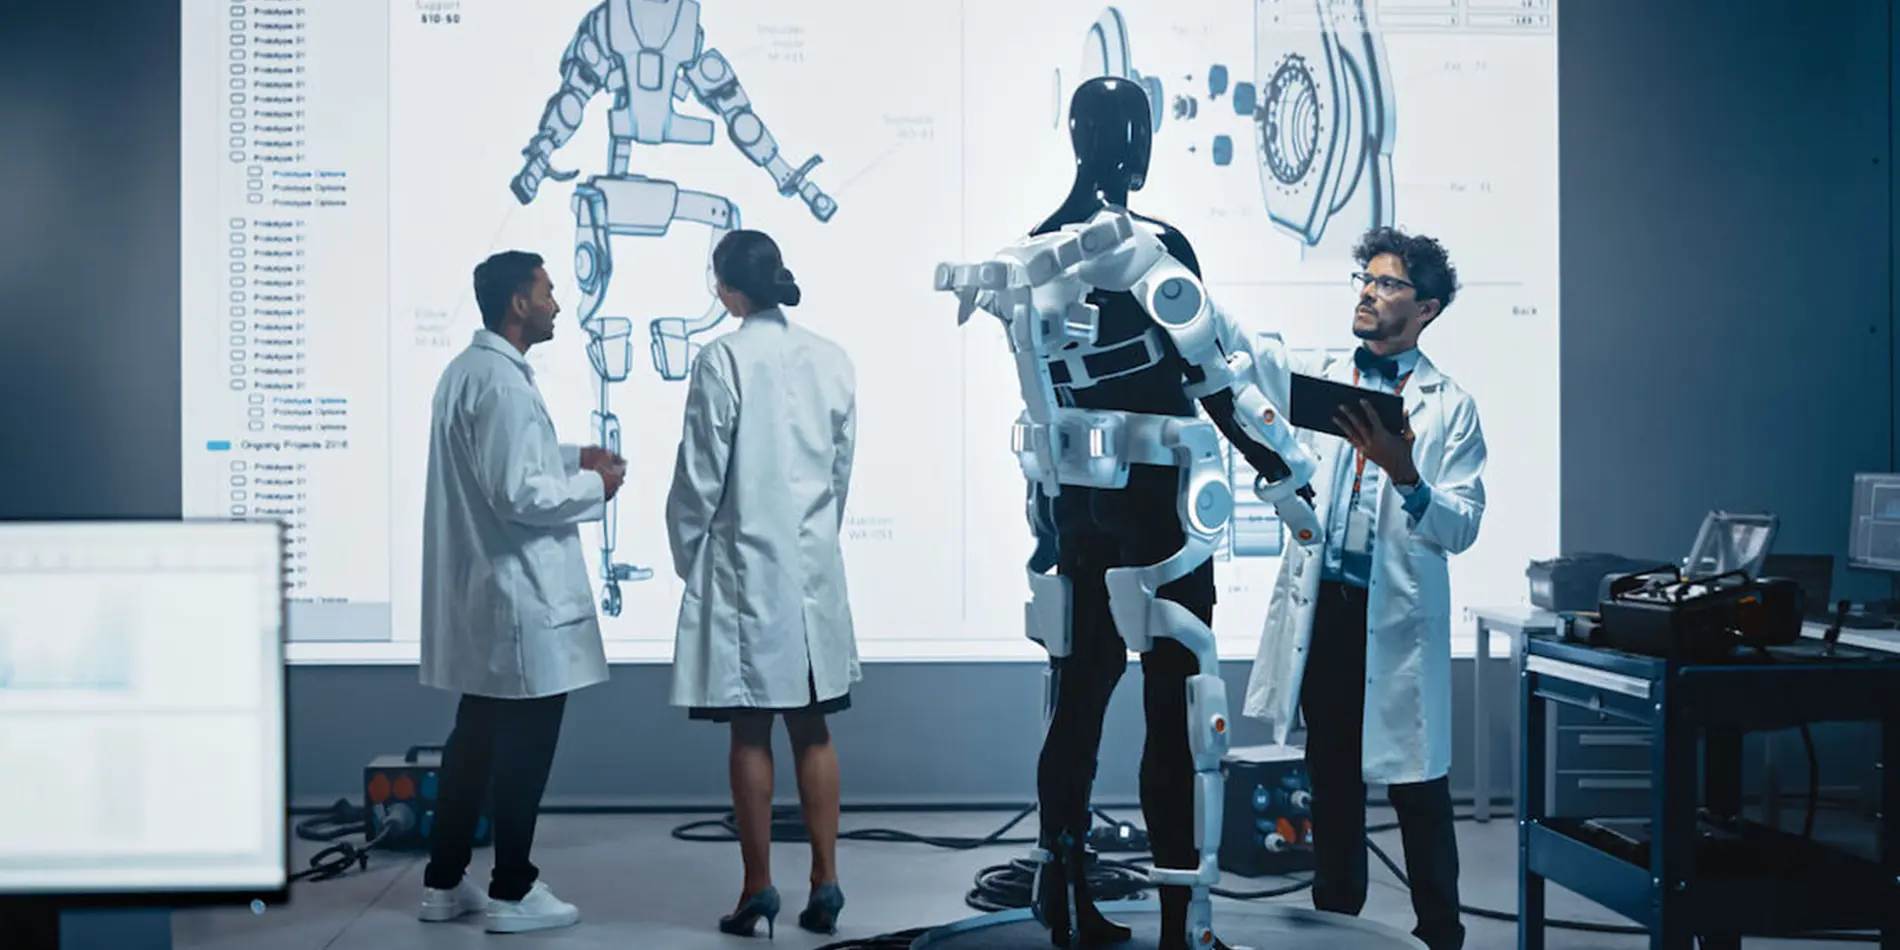 People in lab coats stand in front of both a physical humanoid robot and one projected on the wall.